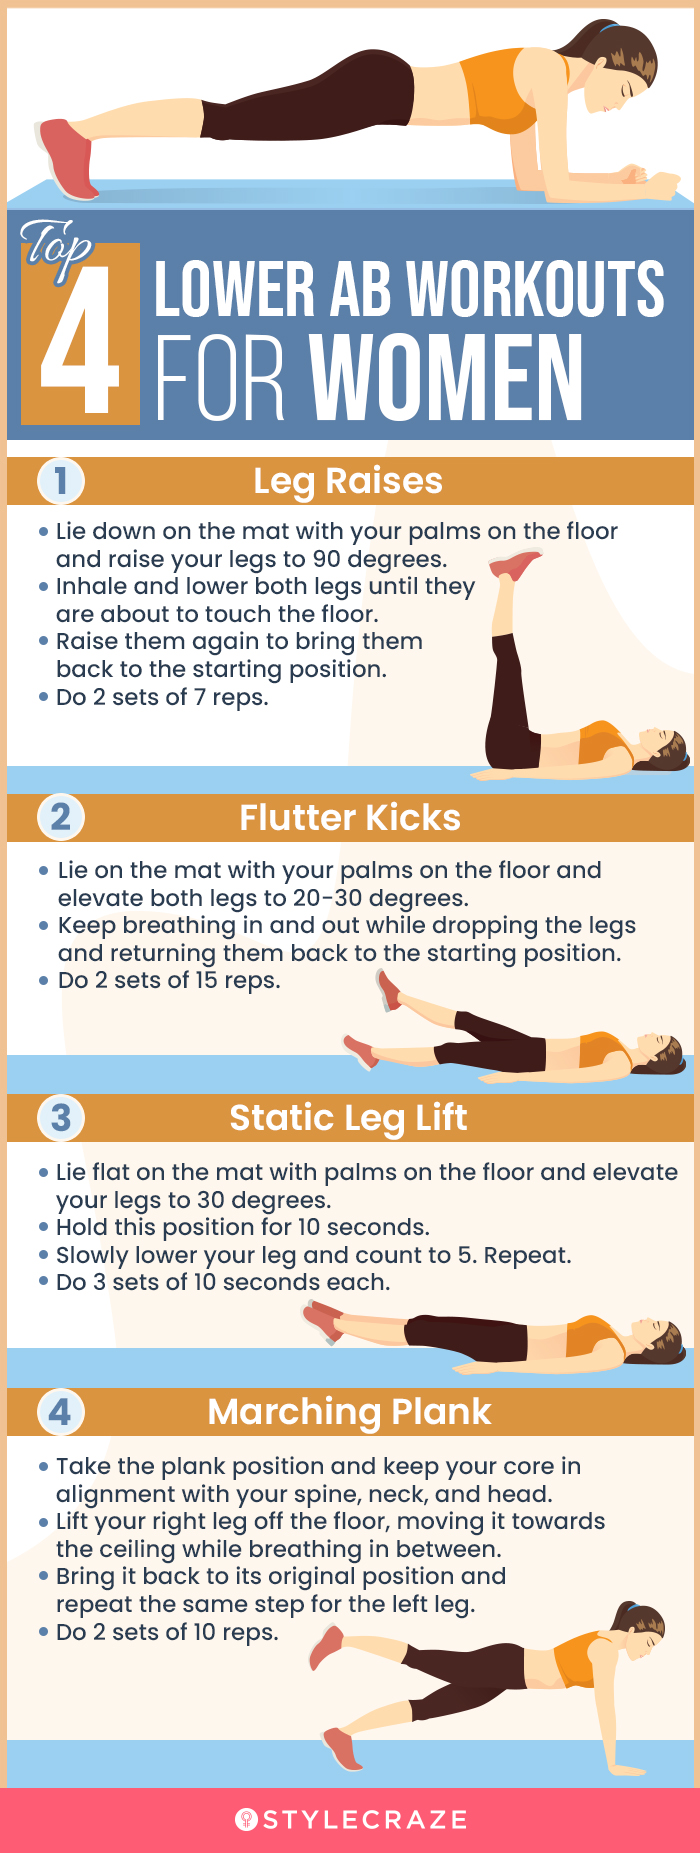 top 4 lower workouts for women (infographic)